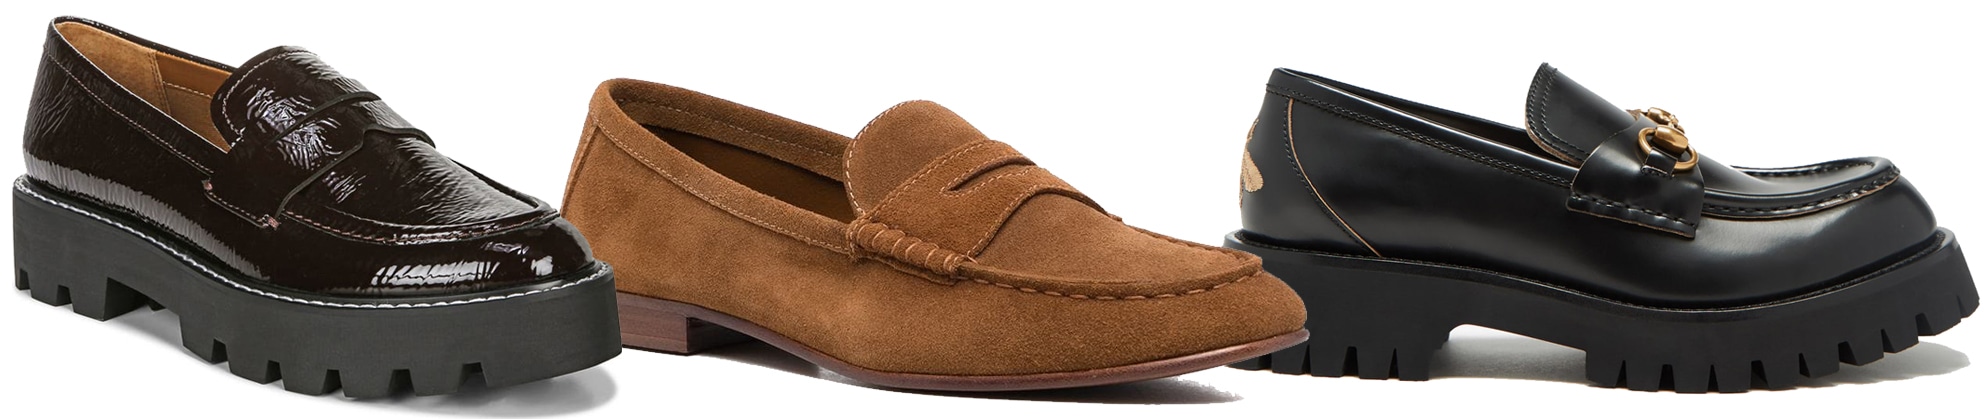 Loafers are a stylish shoe design known for their rigid sole, low heel, and mid-cut upper with a distinctive seam